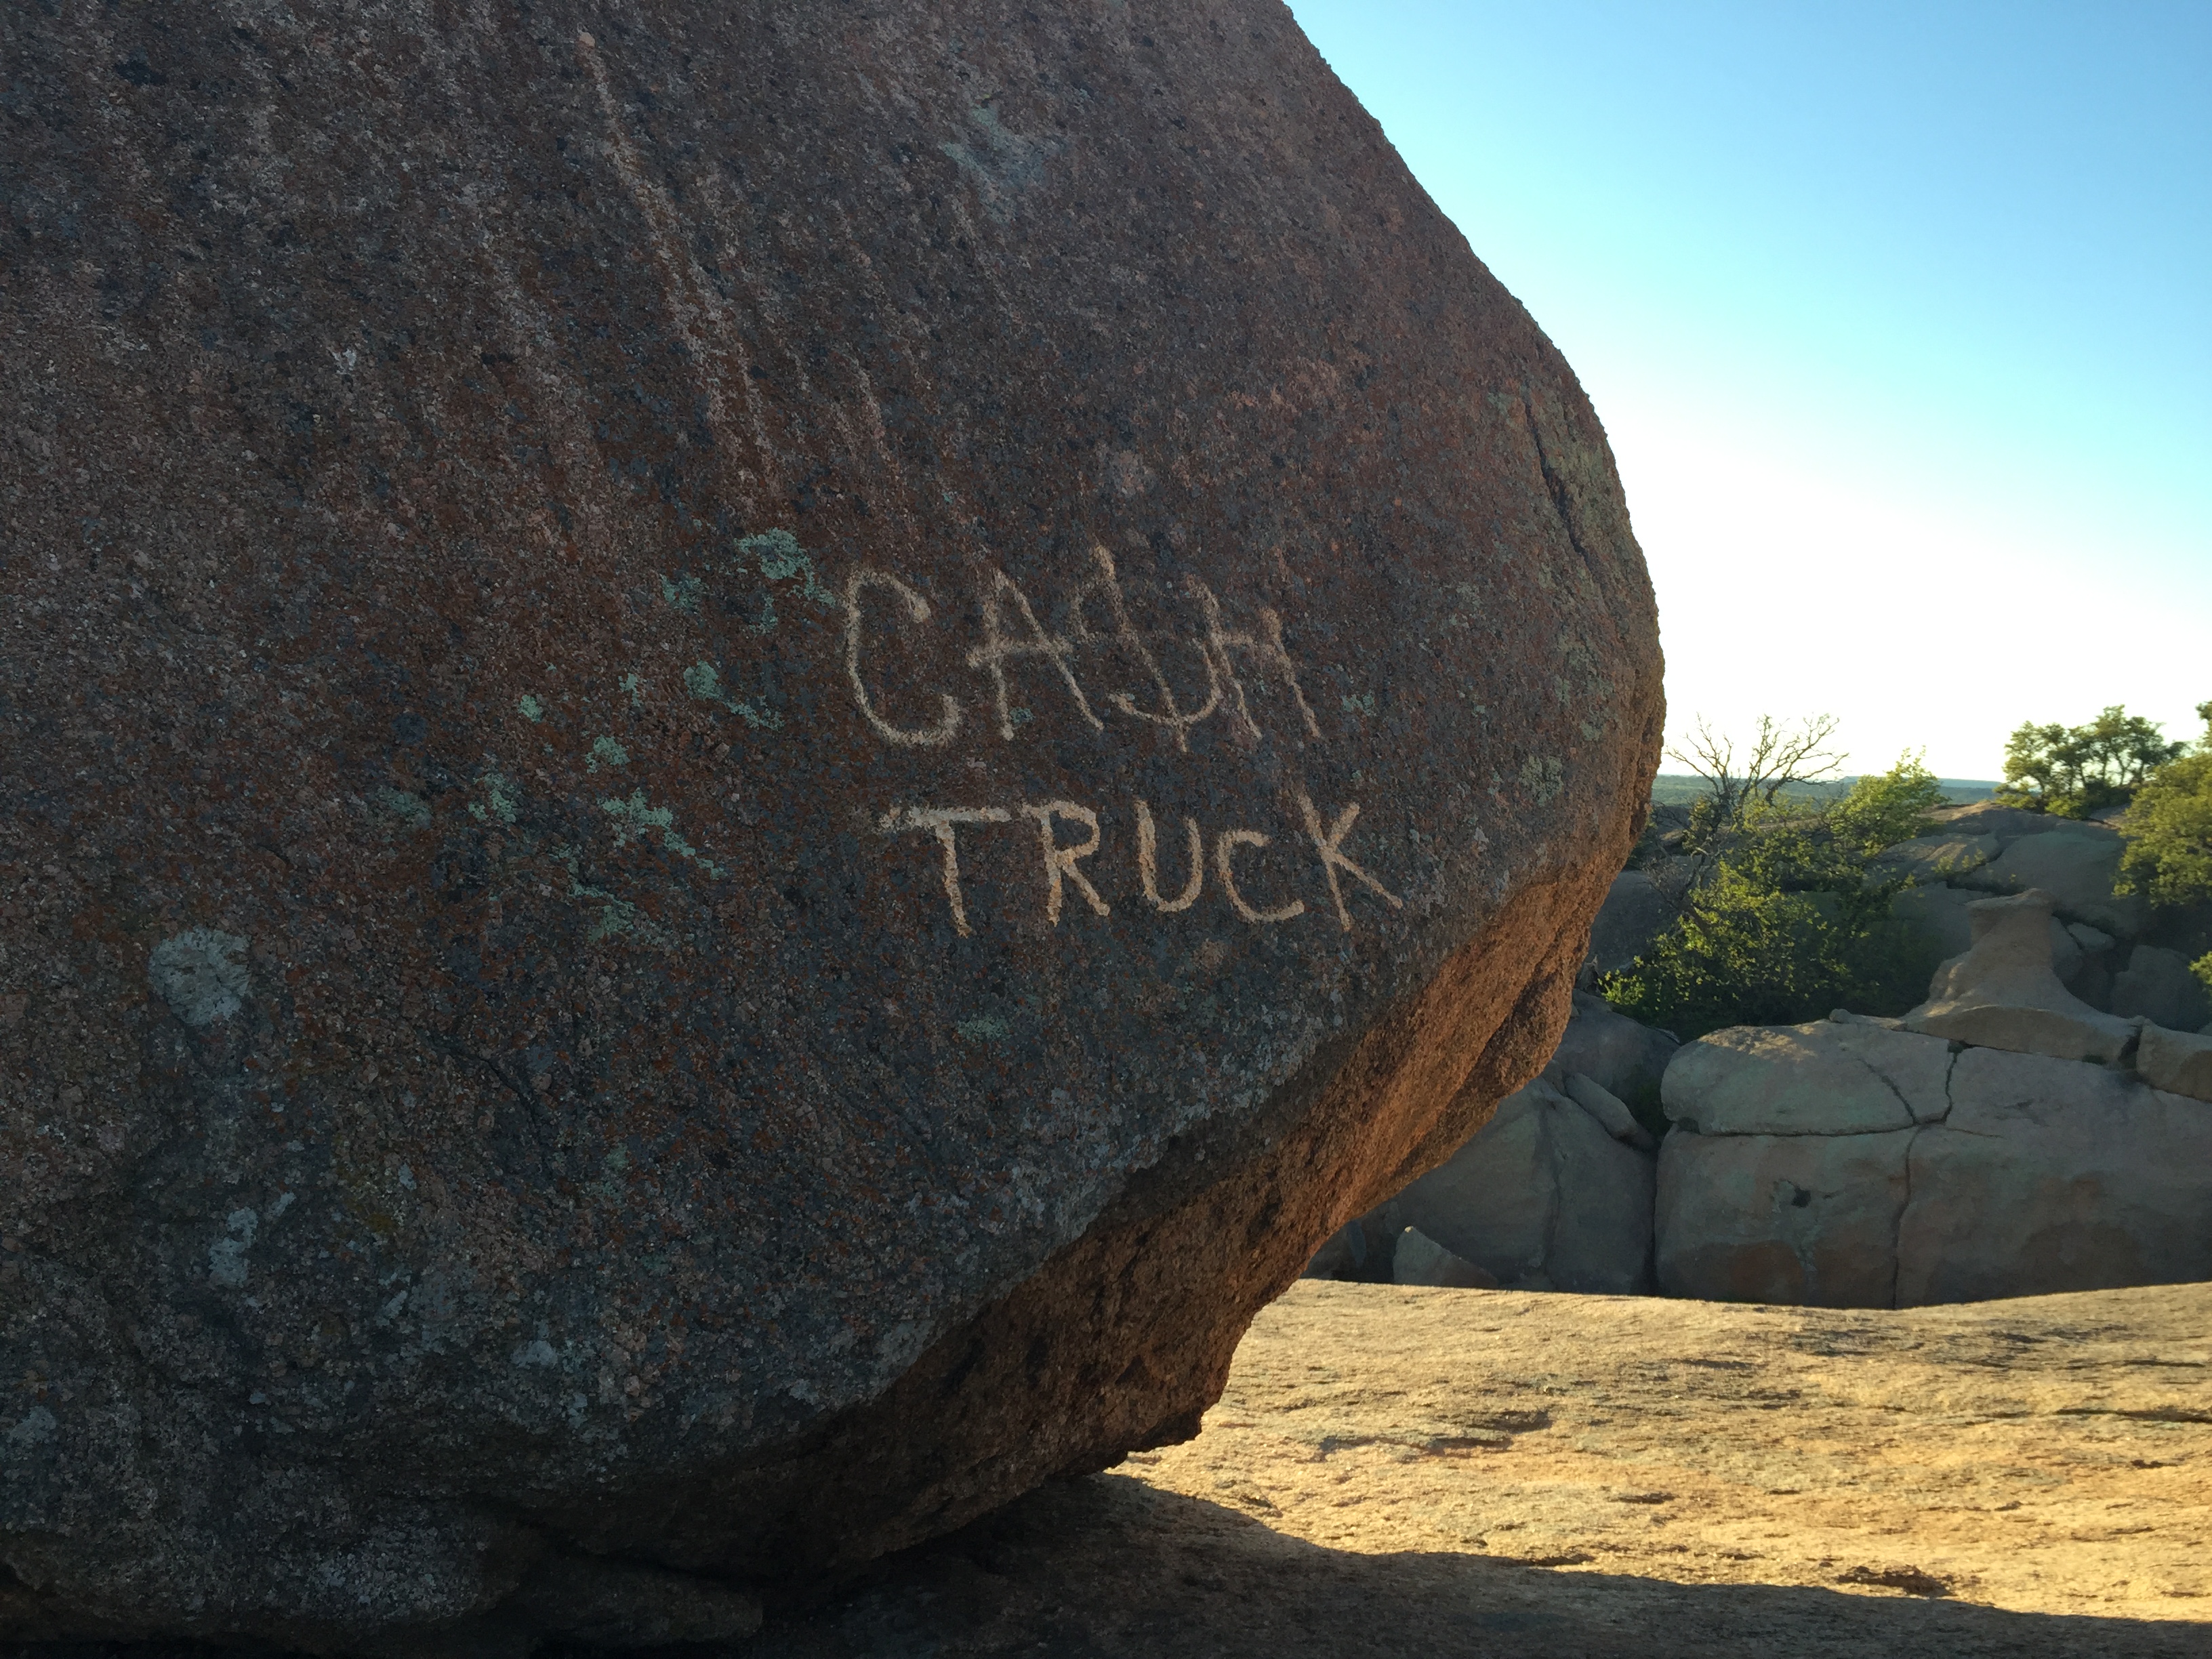 Enchanted Rock Vandalized, Authorities Looking for Culprits